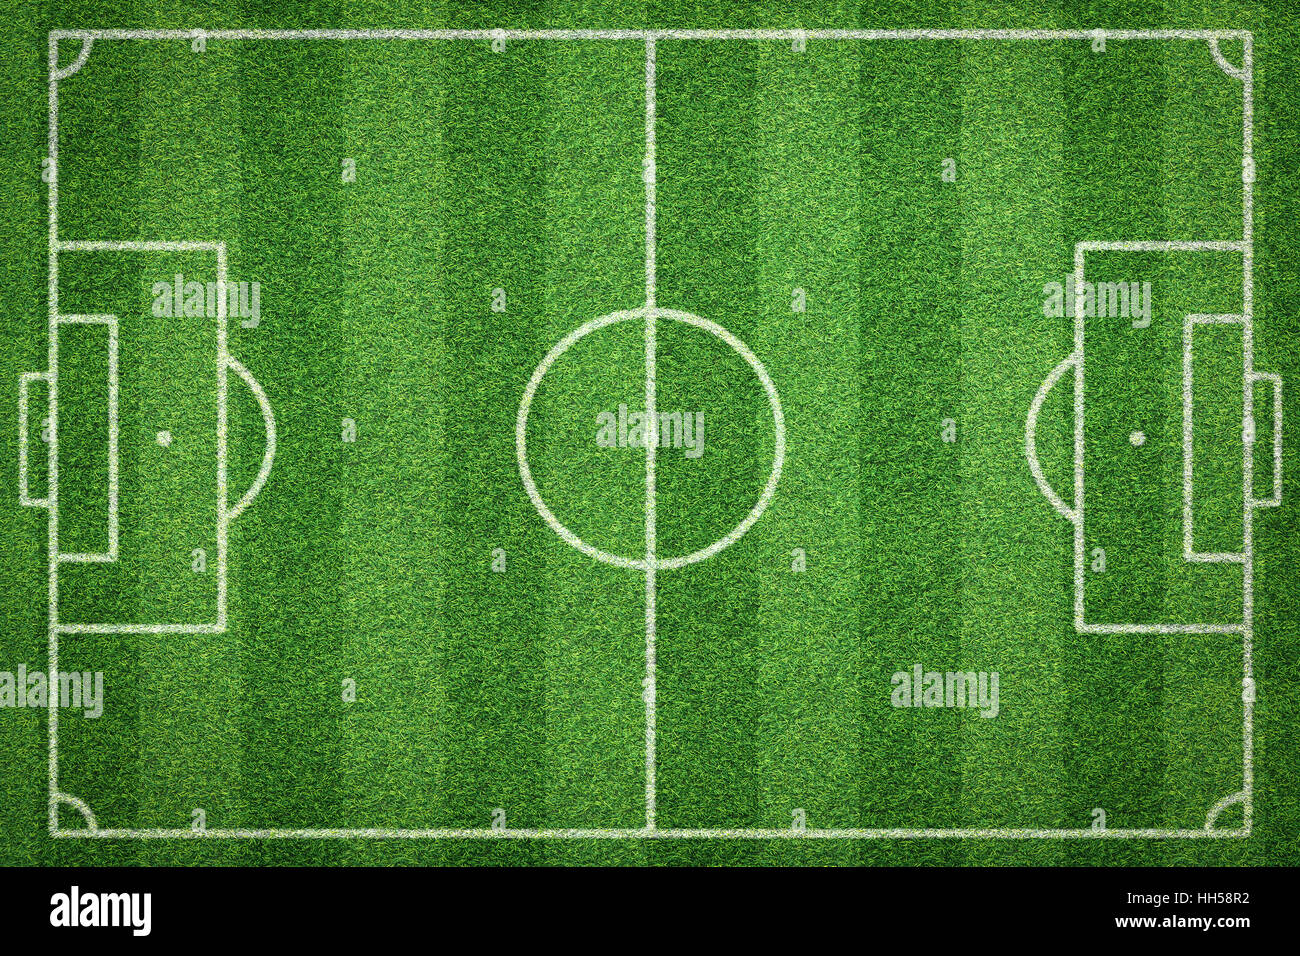 top view of soccer field, football field Stock Photo